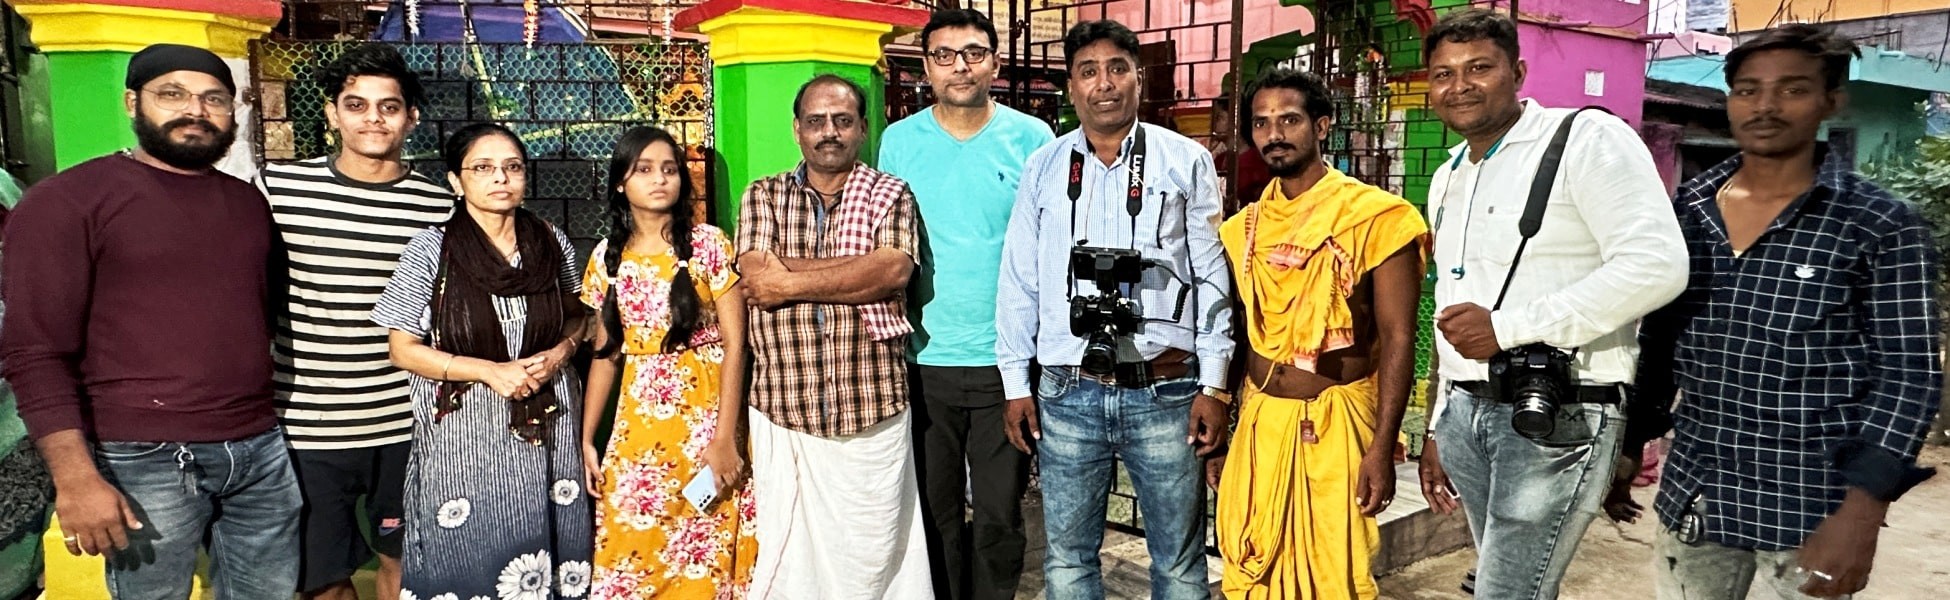 documentary film shooting locations in india, documentary film shooting locations in Delhi, documentary video shooting locations in india, documentary video shooting locations in Delhi, tv documentary shooting locations in india, tv documentary shooting locations in delhi, documentary shooting locations in india, documentary shooting locations in delhi